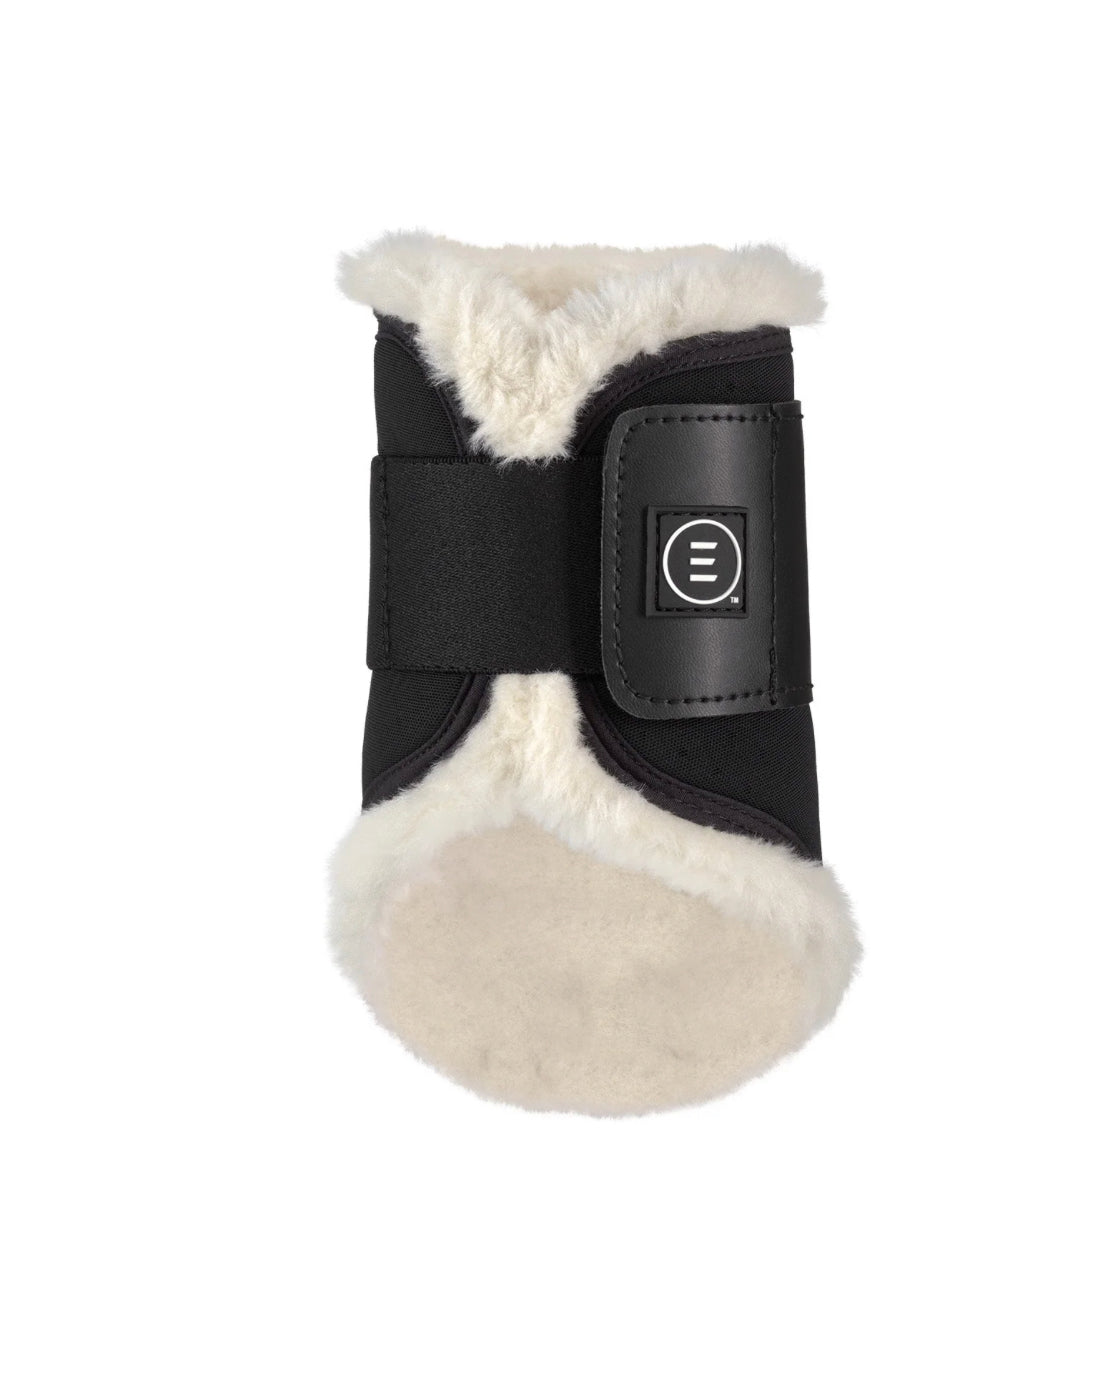 Equifit Everyday SheepsWool Hind Boots